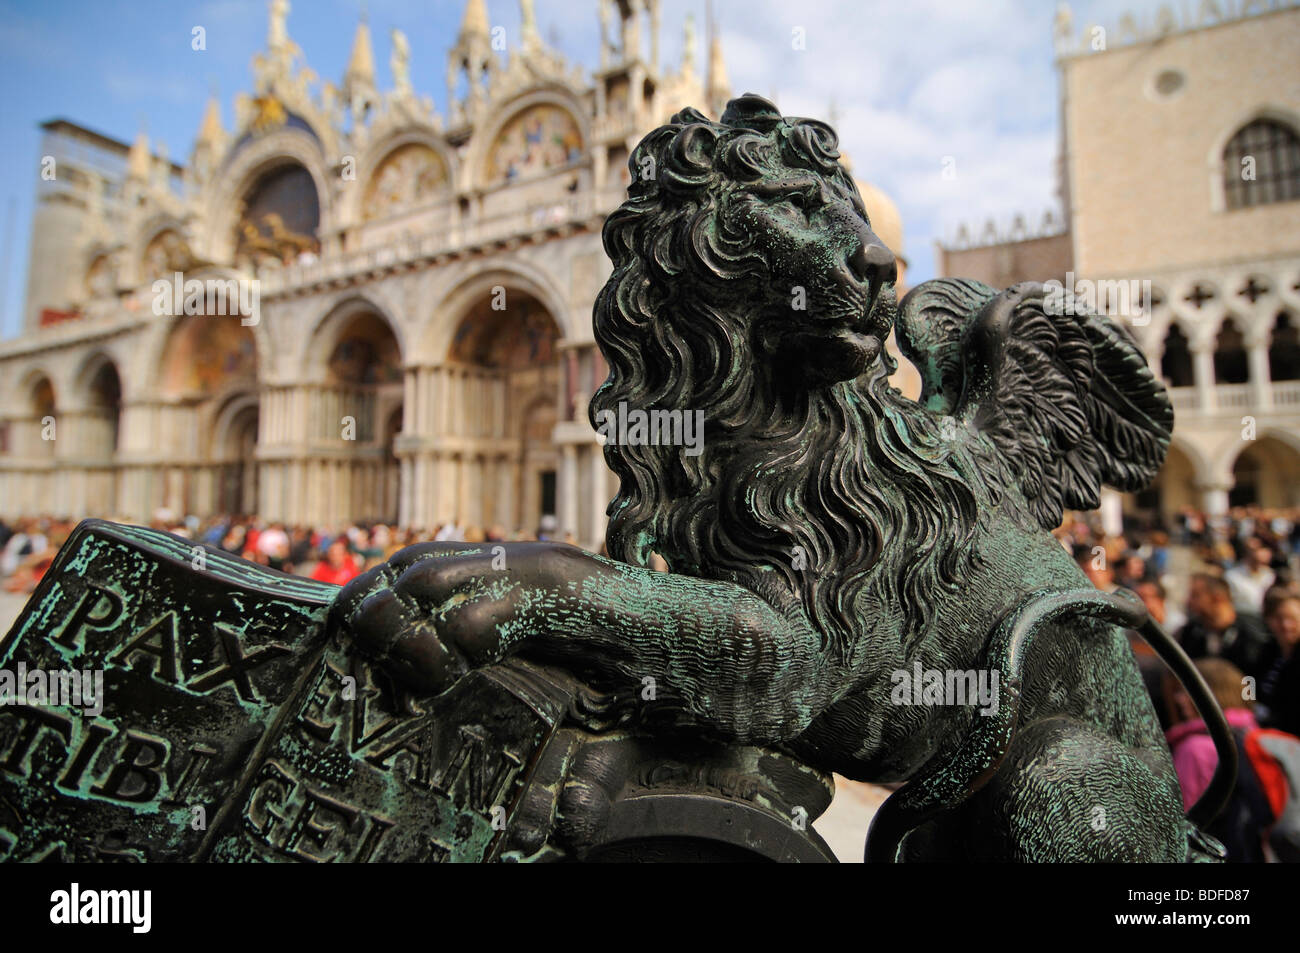 The Lion of Venice, in the back the Basilica of San Marco, Venice, Italy, Europe Stock Photo